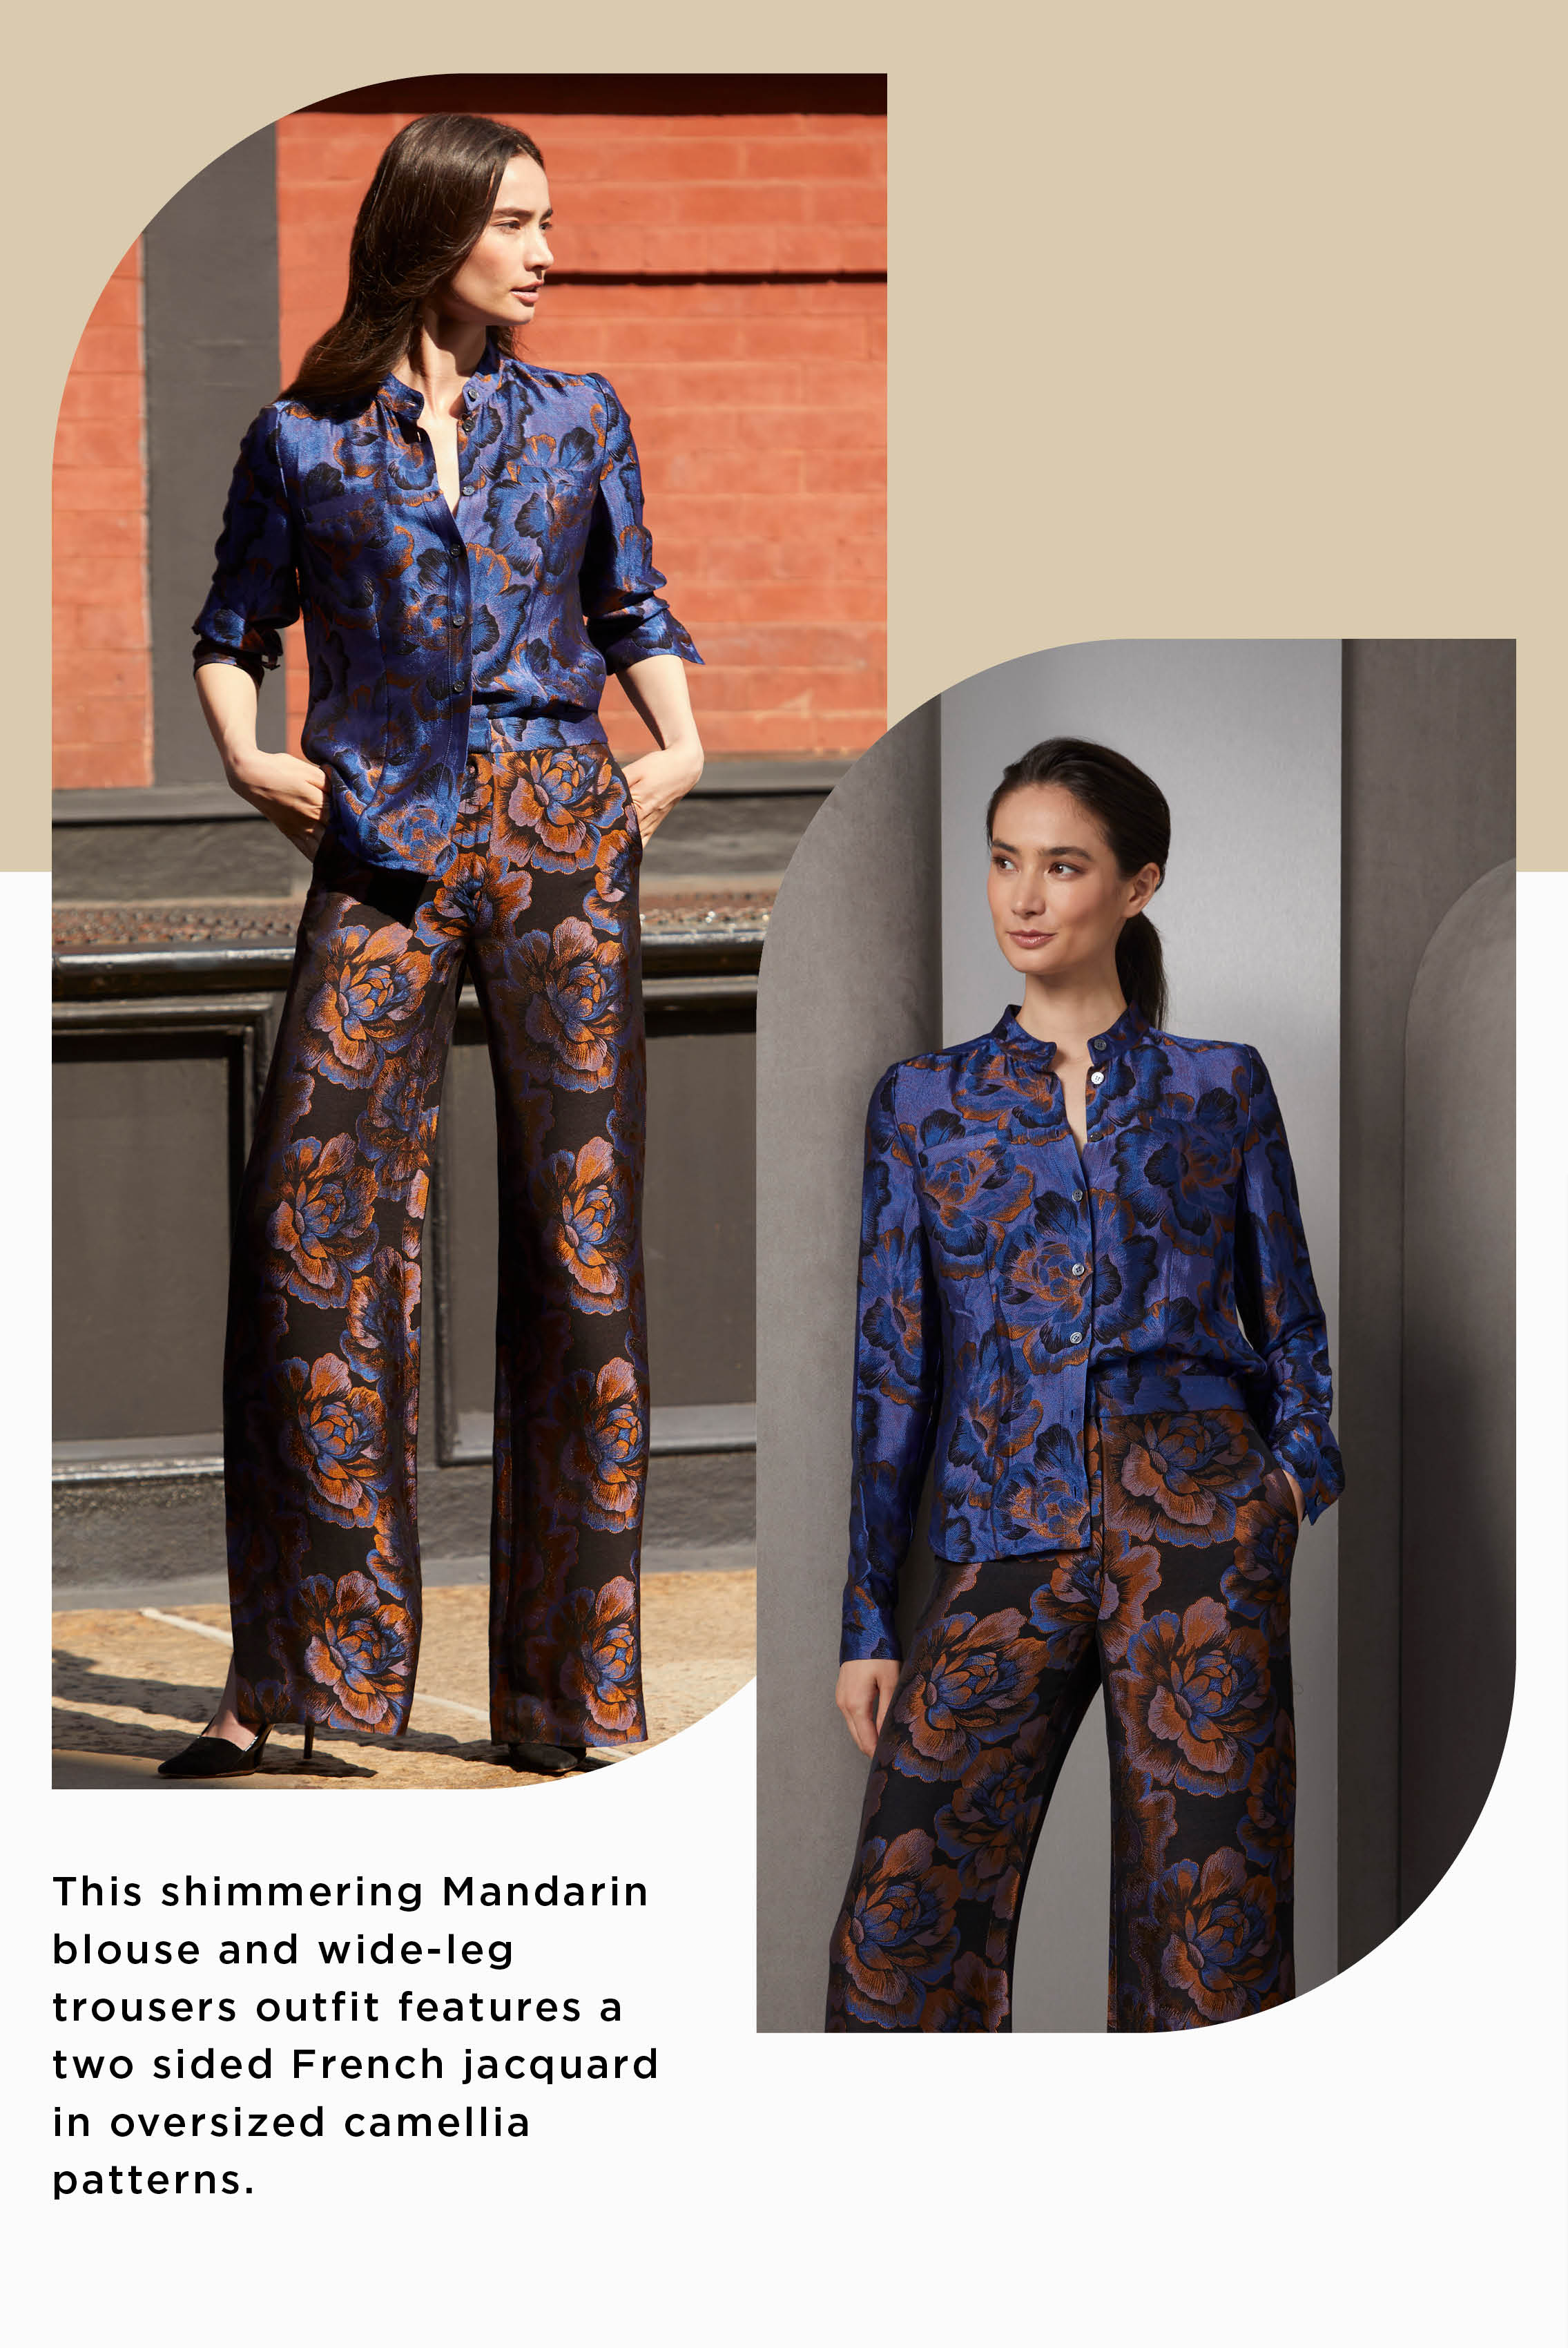 This shimmering Mandarin blouse and wide-leg trousers outfit features a two sided French jacquard in oversized camellia patterns. Both sides include the same four colors in different proportions for a dramatic contrast. 